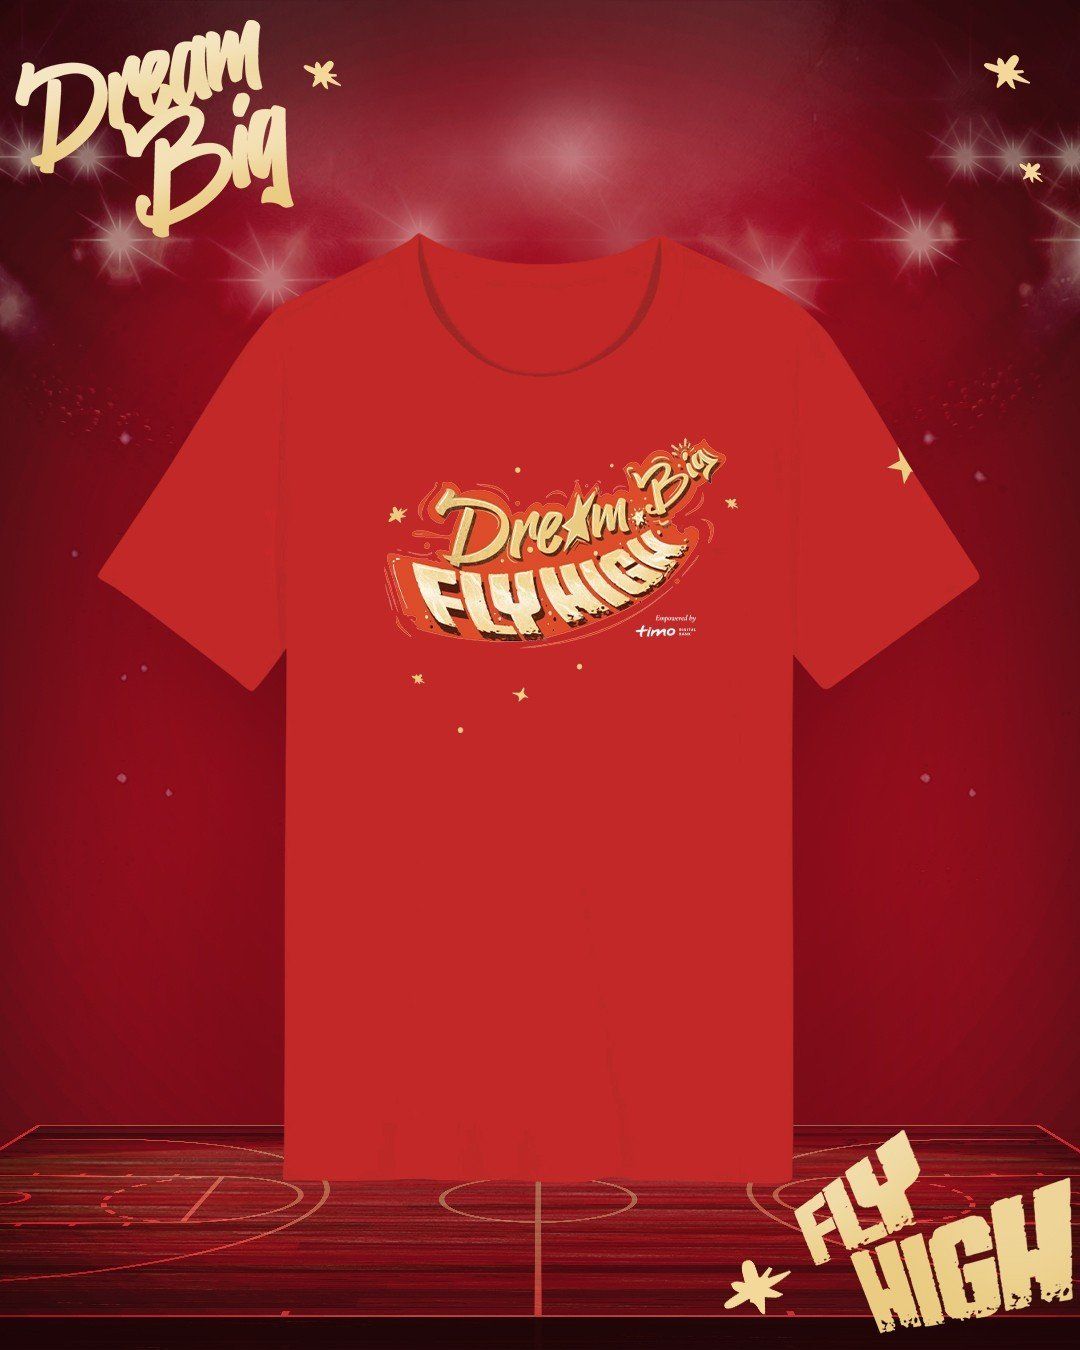  T-SHIRT "DREAM BIG FLY HIGH" COLLECTION - LIMITED EDITION 